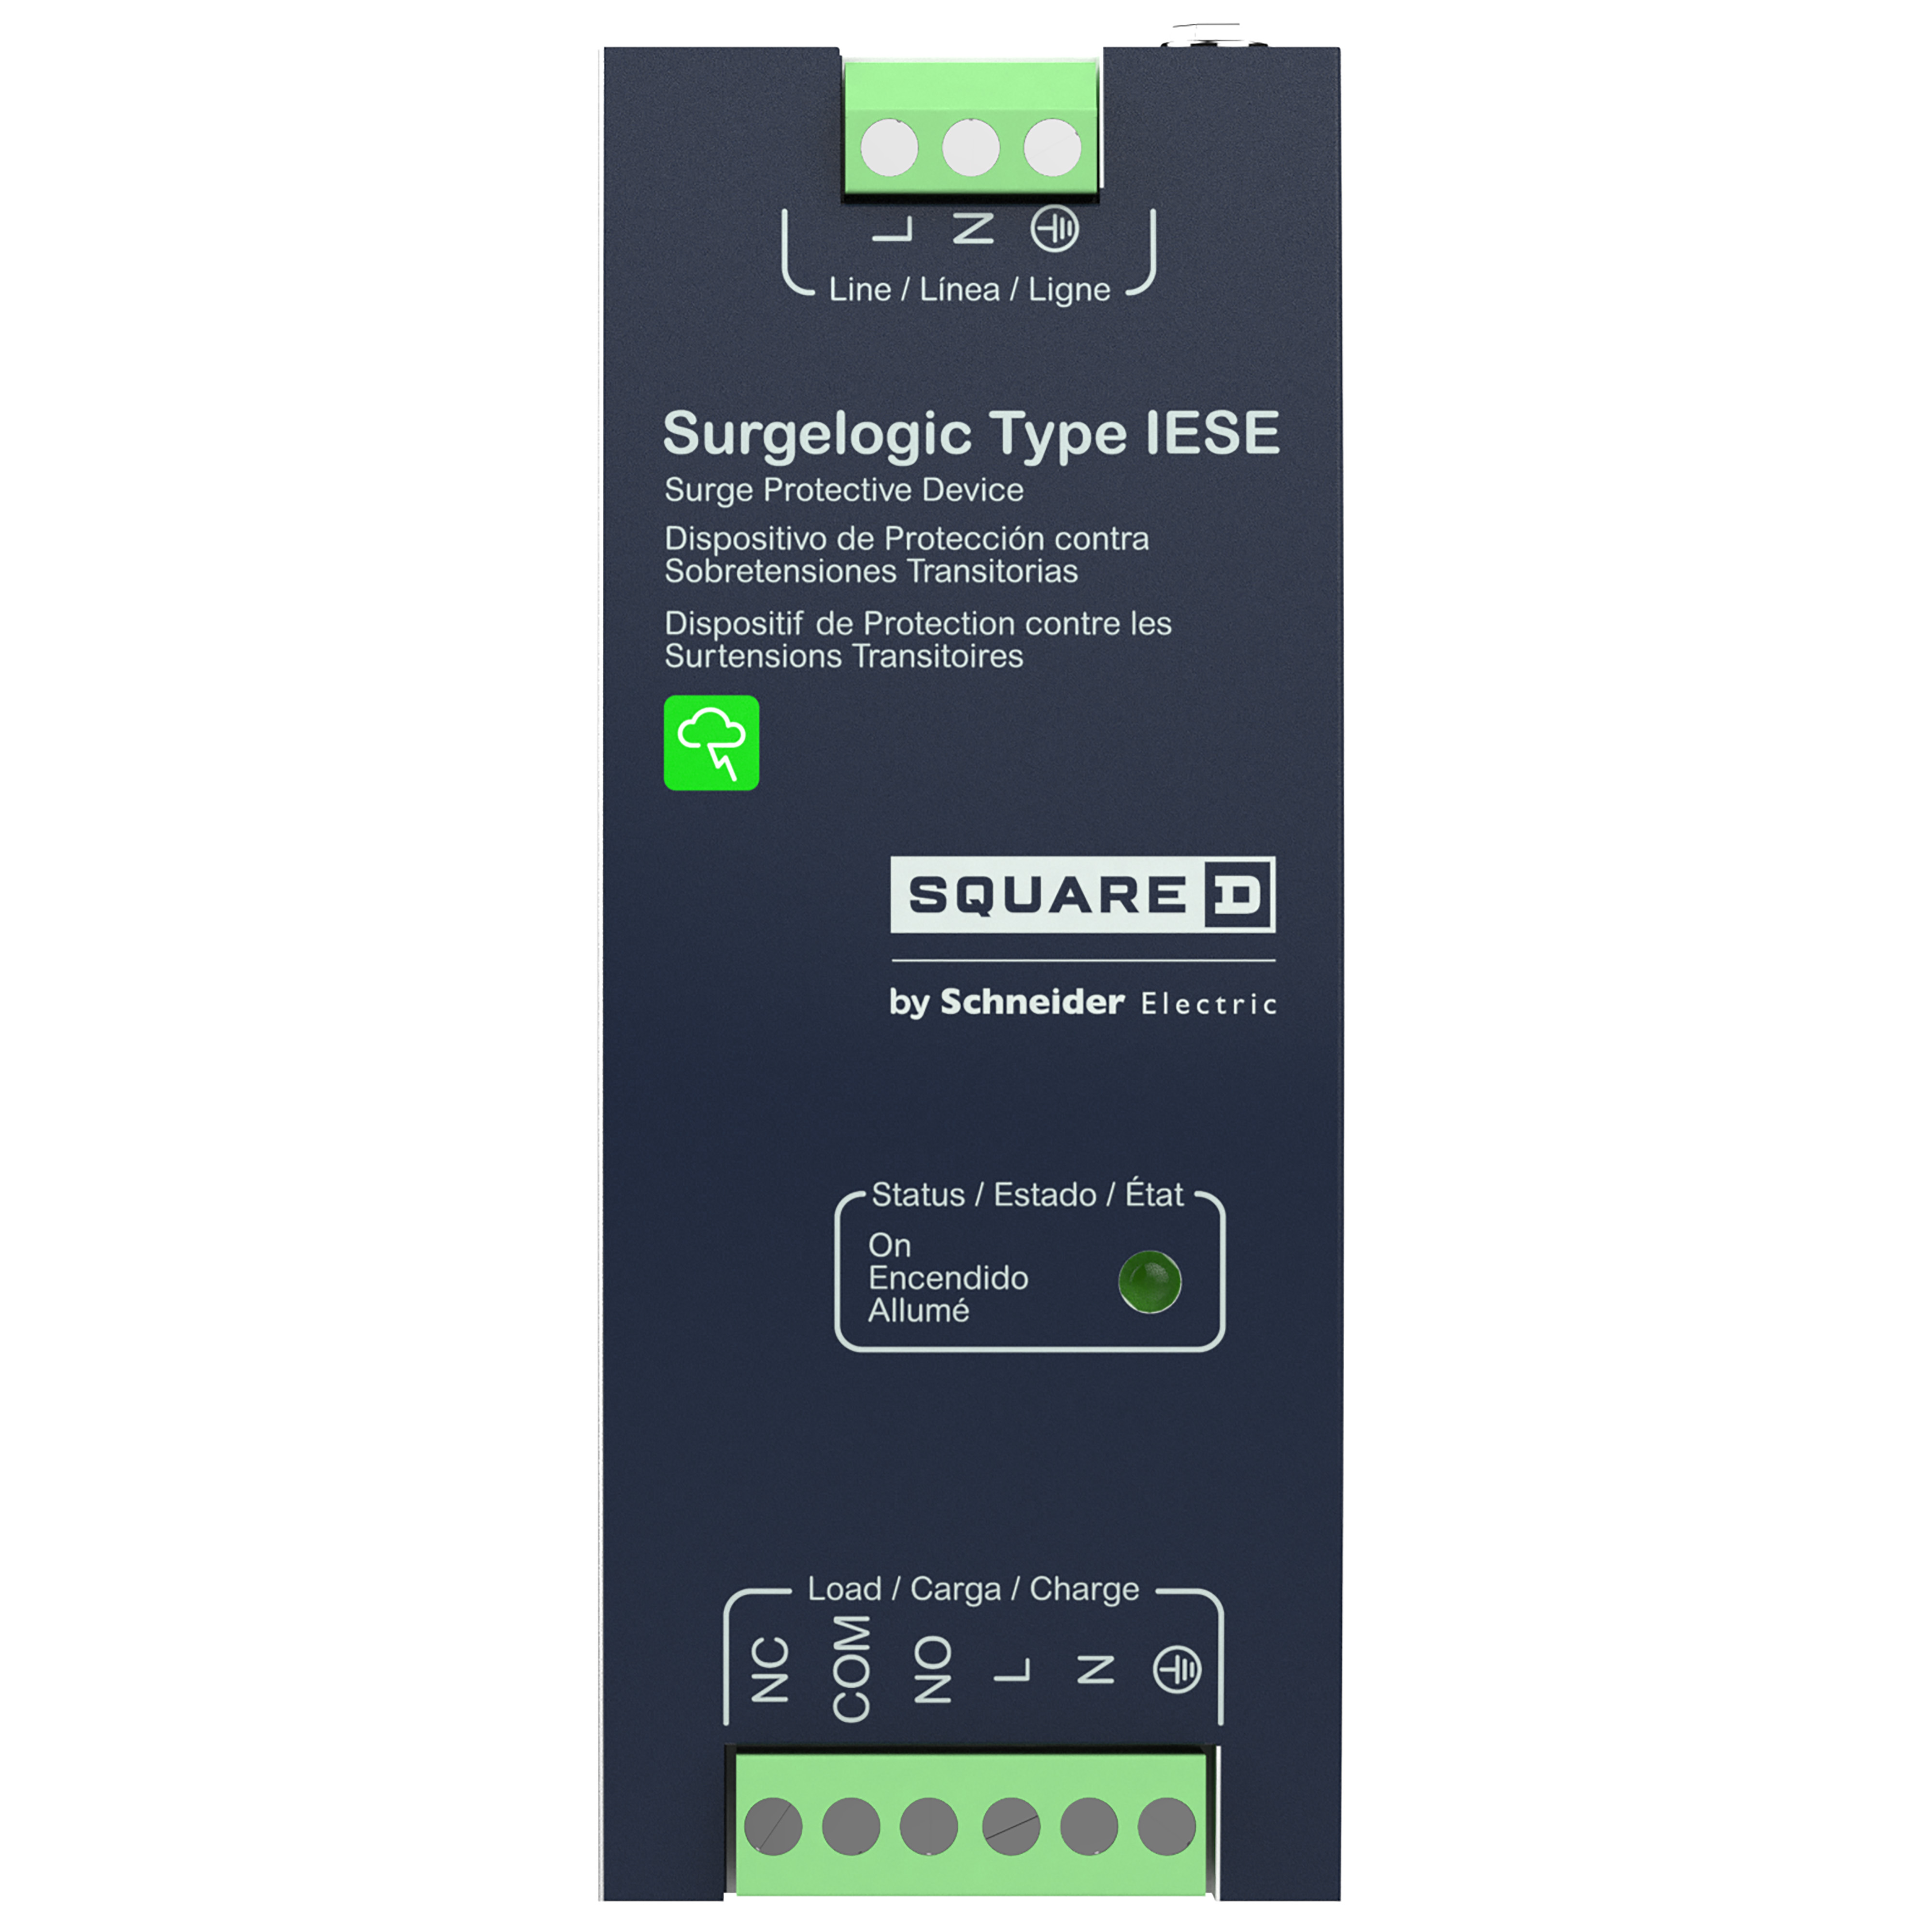 Surge protection device, Surgelogic, type IESE, 20A, 120 V, DIN rail mount, active tracking filter